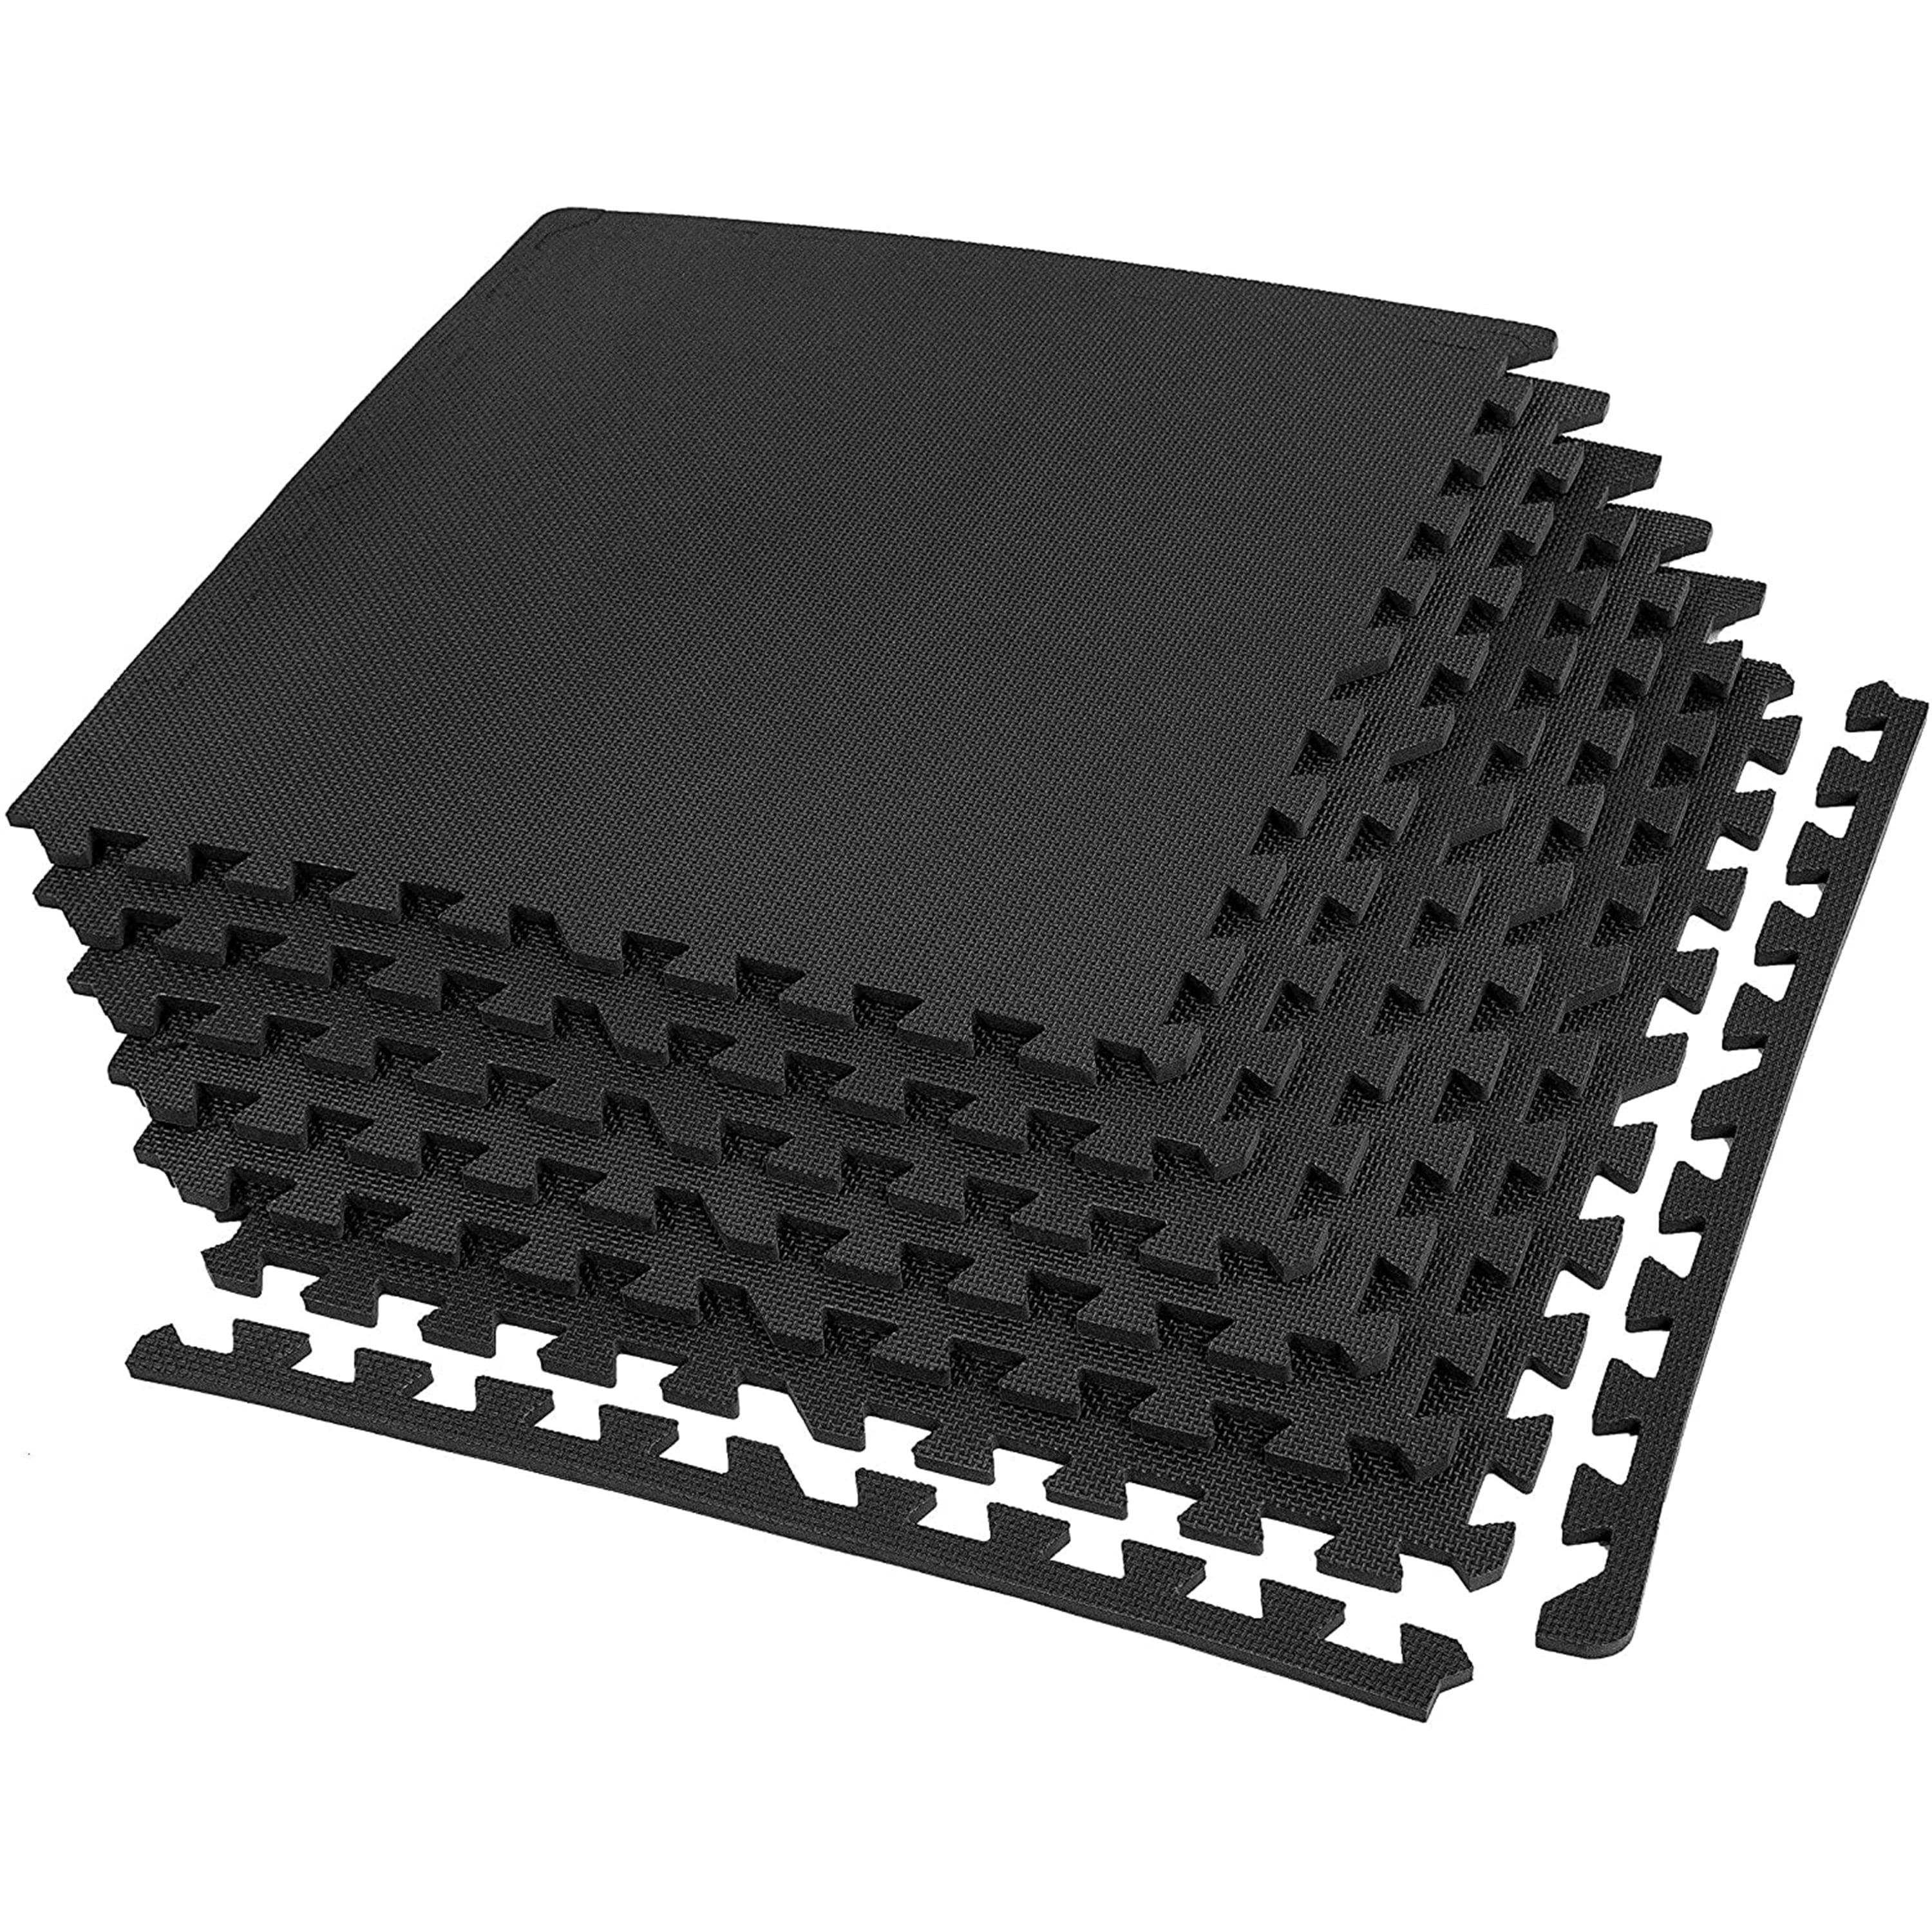 Velotas 3/8-Inch Thick Interlocking Foam Tiles with Rubber Top - Personal Fitness Mat Eva Foam Puzzle Floor Tiles for Home Gym Workouts 24 in x 24 in